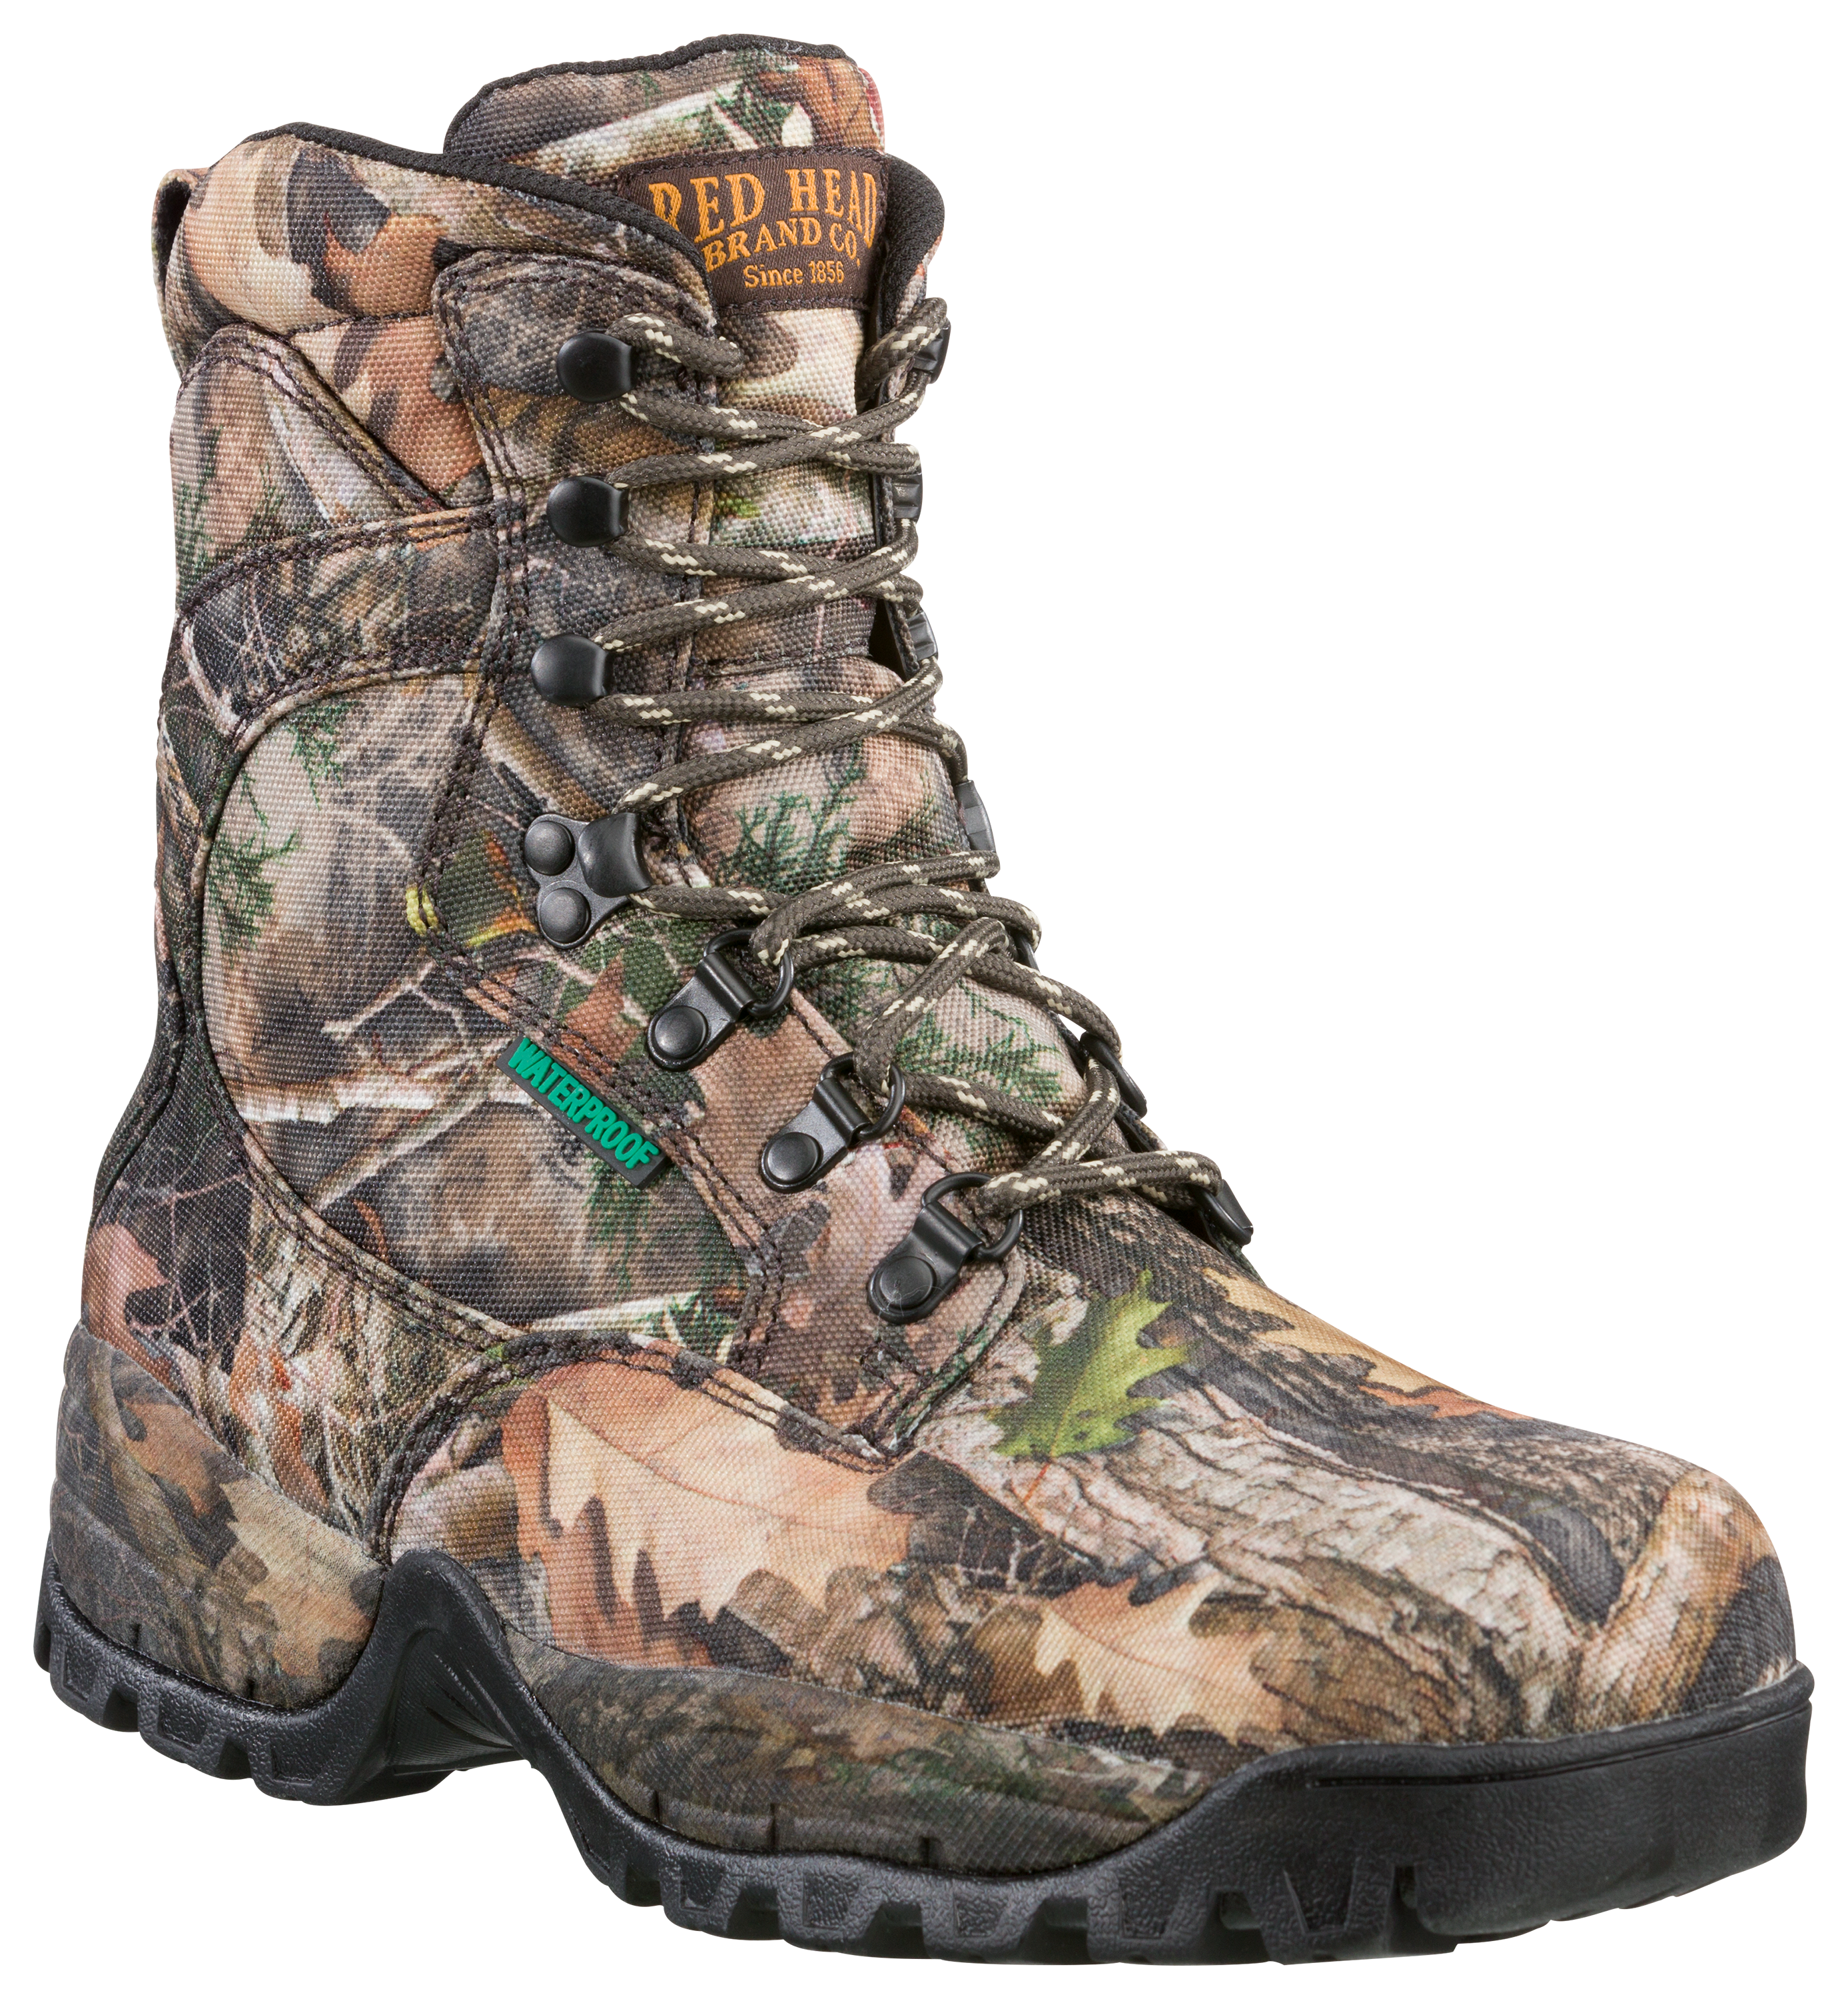 RedHead Big Timber Insulated Waterproof Hunting Boots for Men | Bass ...